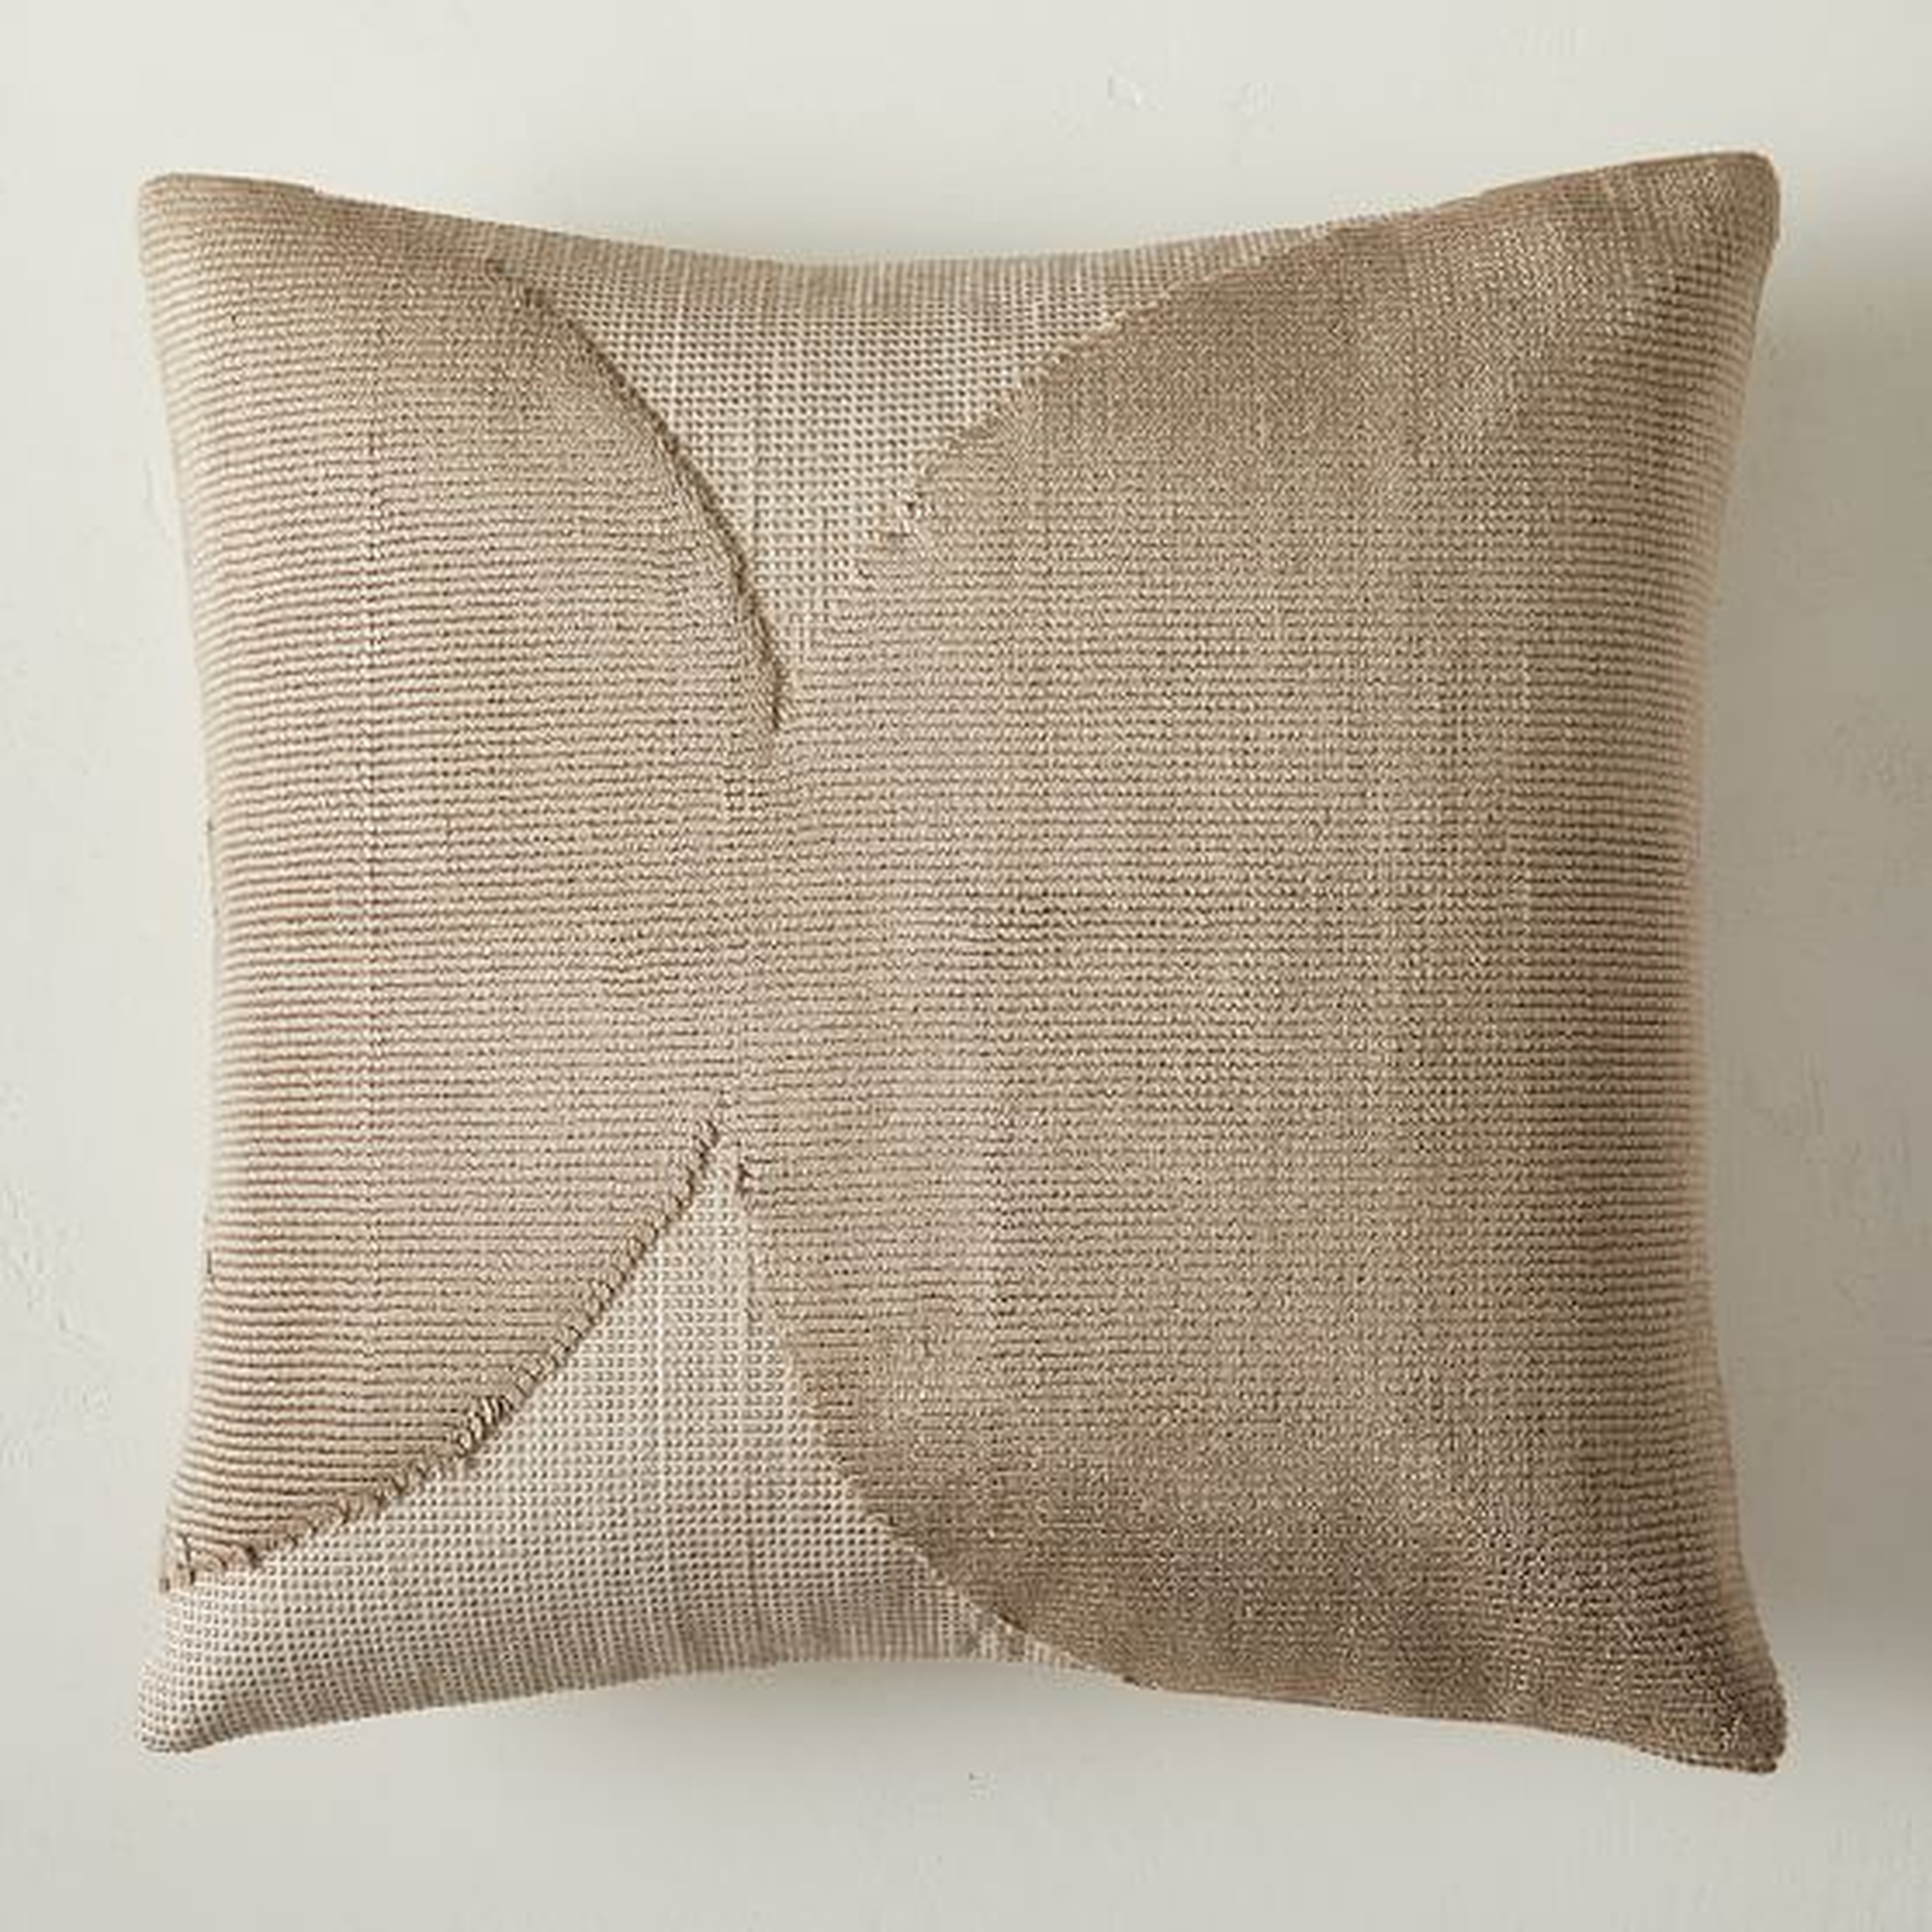 Loomed Loops Pillow Cover, 20"x20", Dark Sand - West Elm